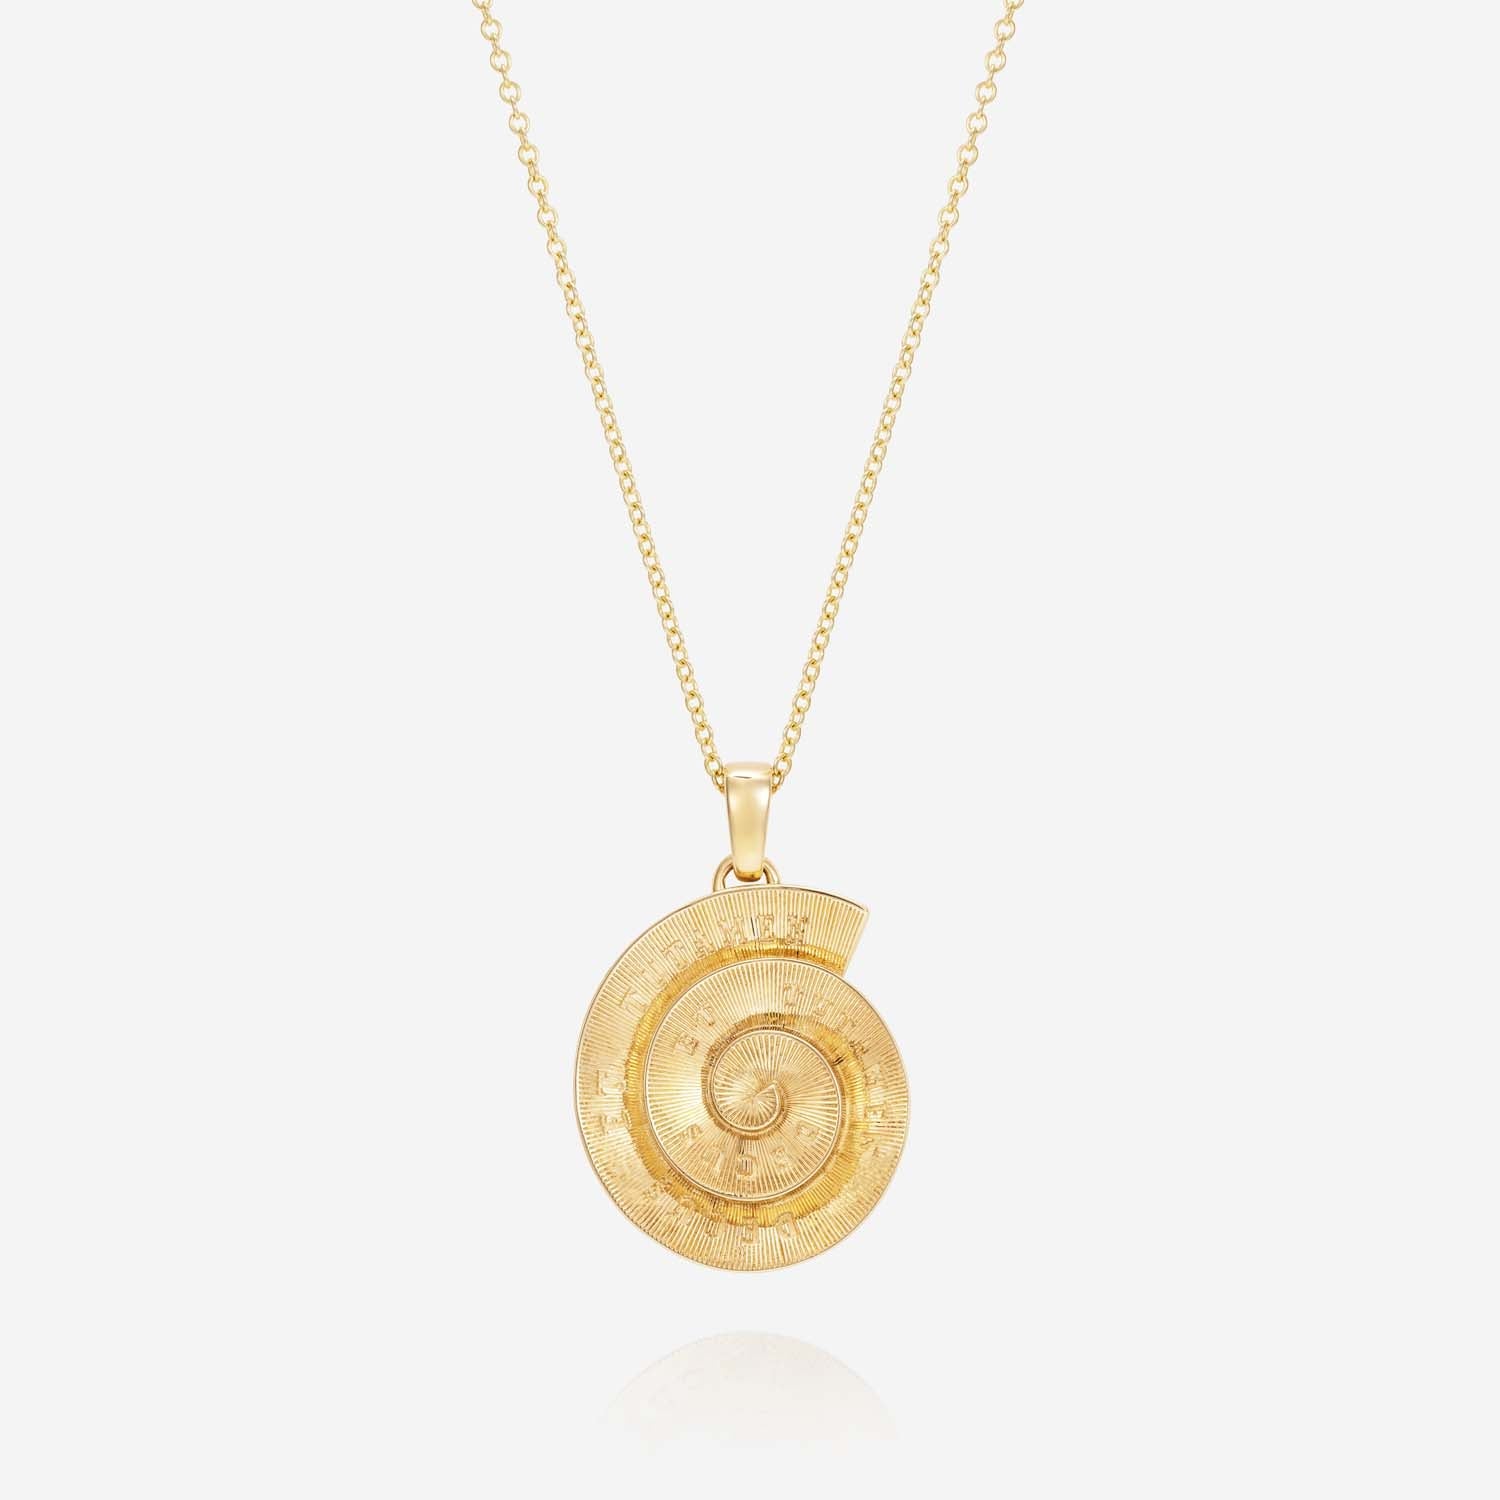 886 Royal Mint Necklaces Tutamen Spiral Pendant with Chain 18ct Yellow Gold